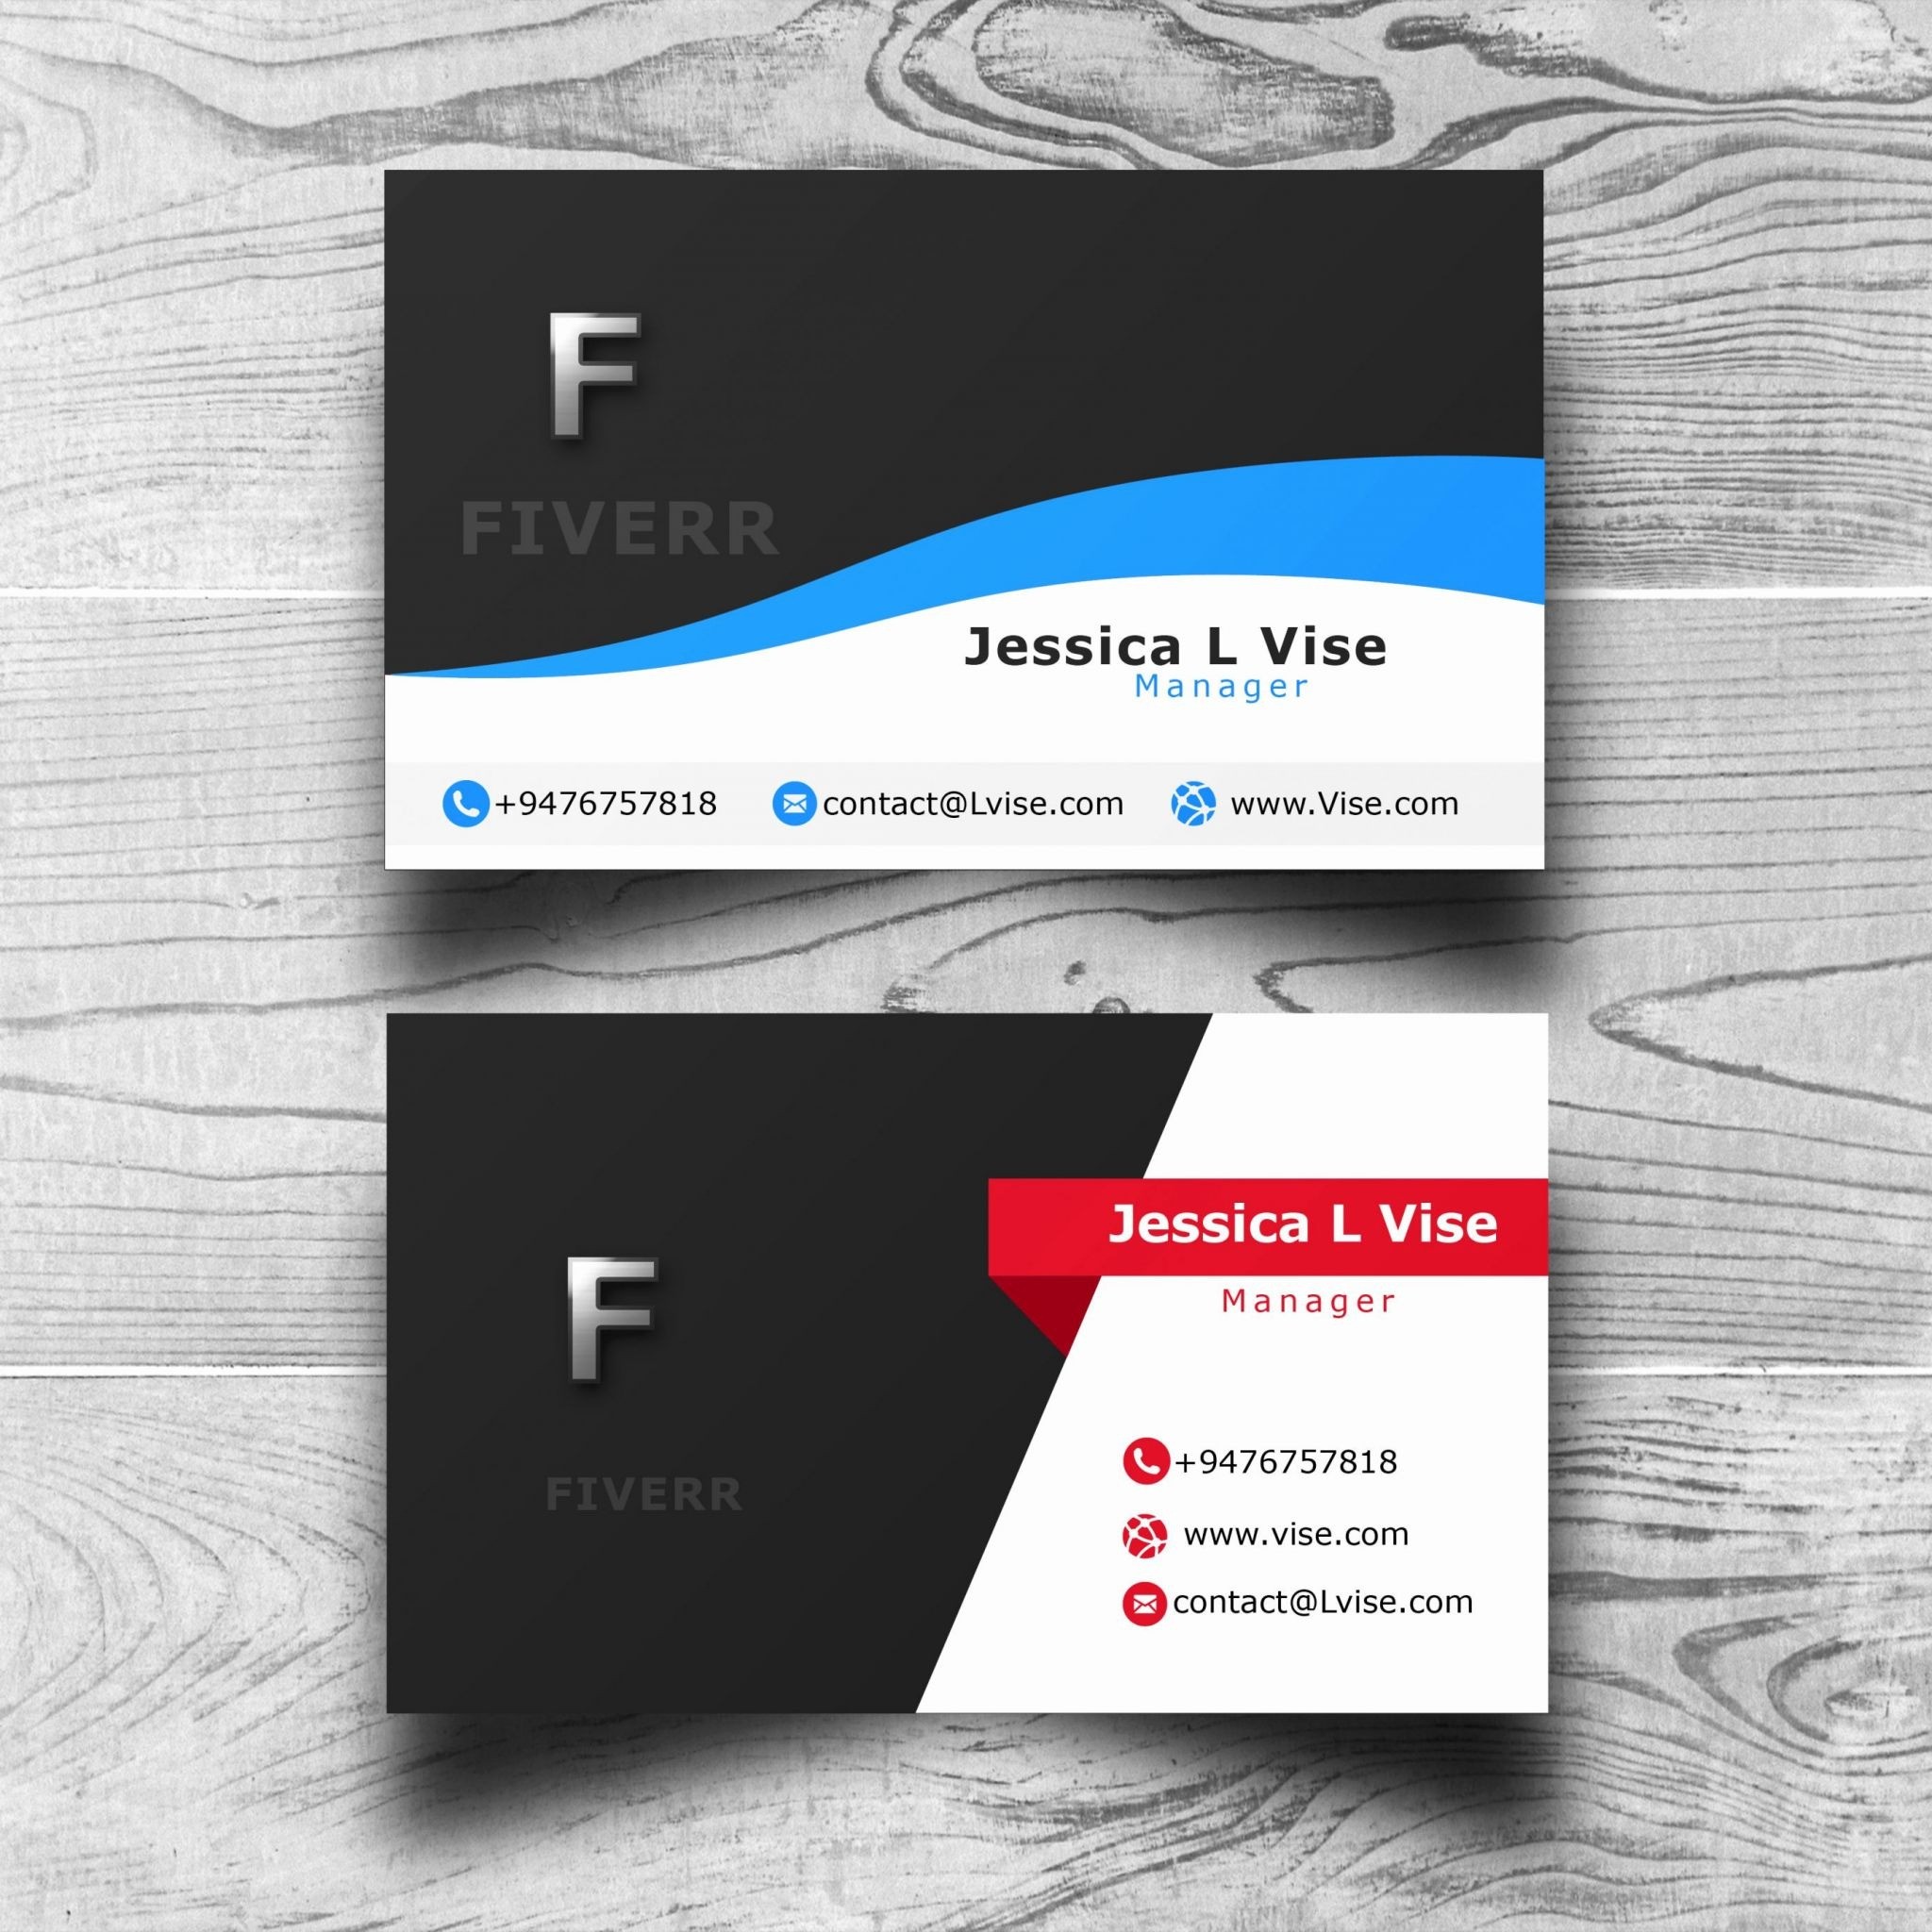 Double Sided Business Card Template Illustrator | Lera Mera Inside 2 Sided Business Card Template Word